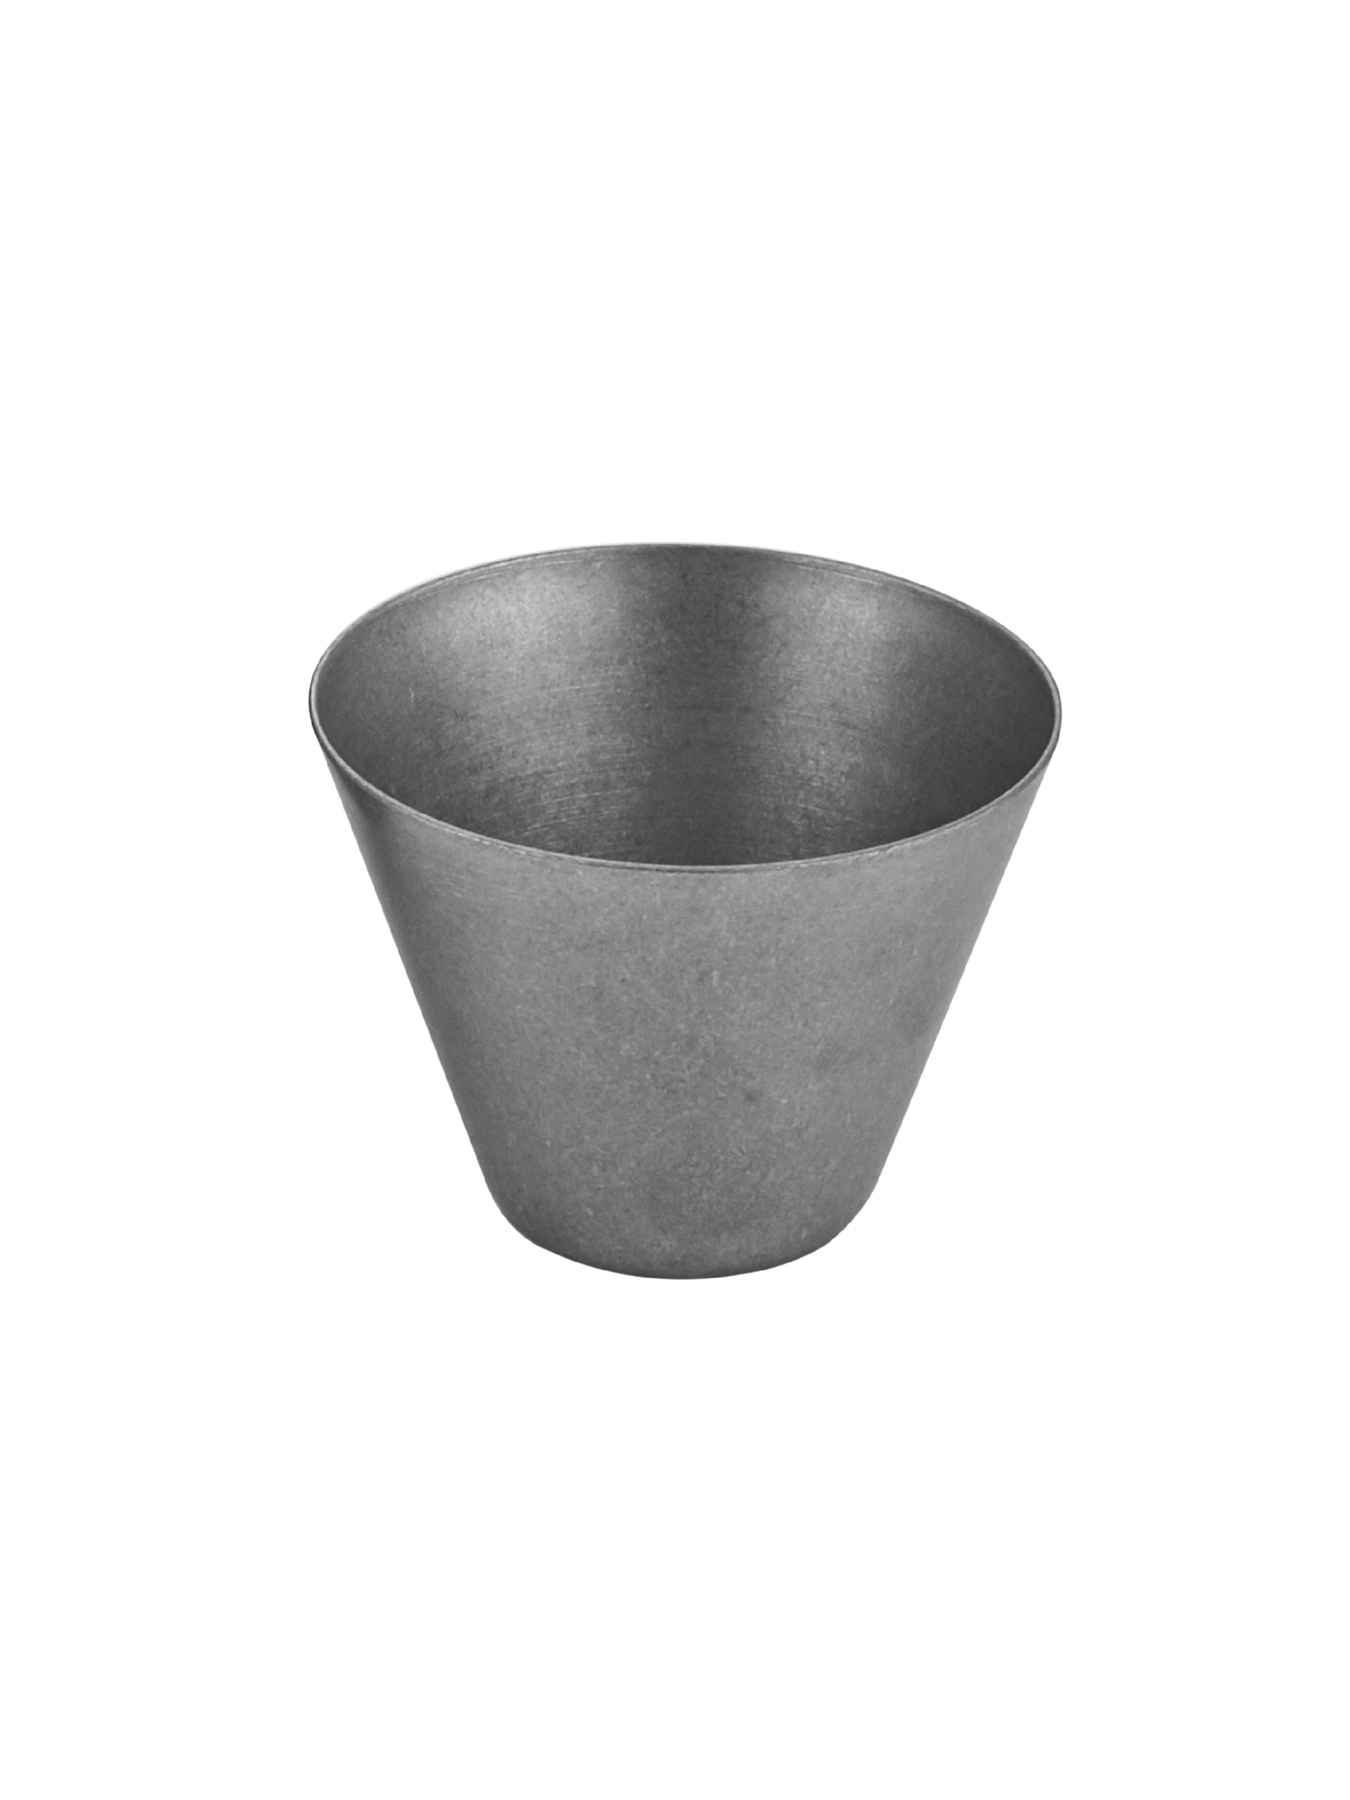 Conical - Nut Bowl